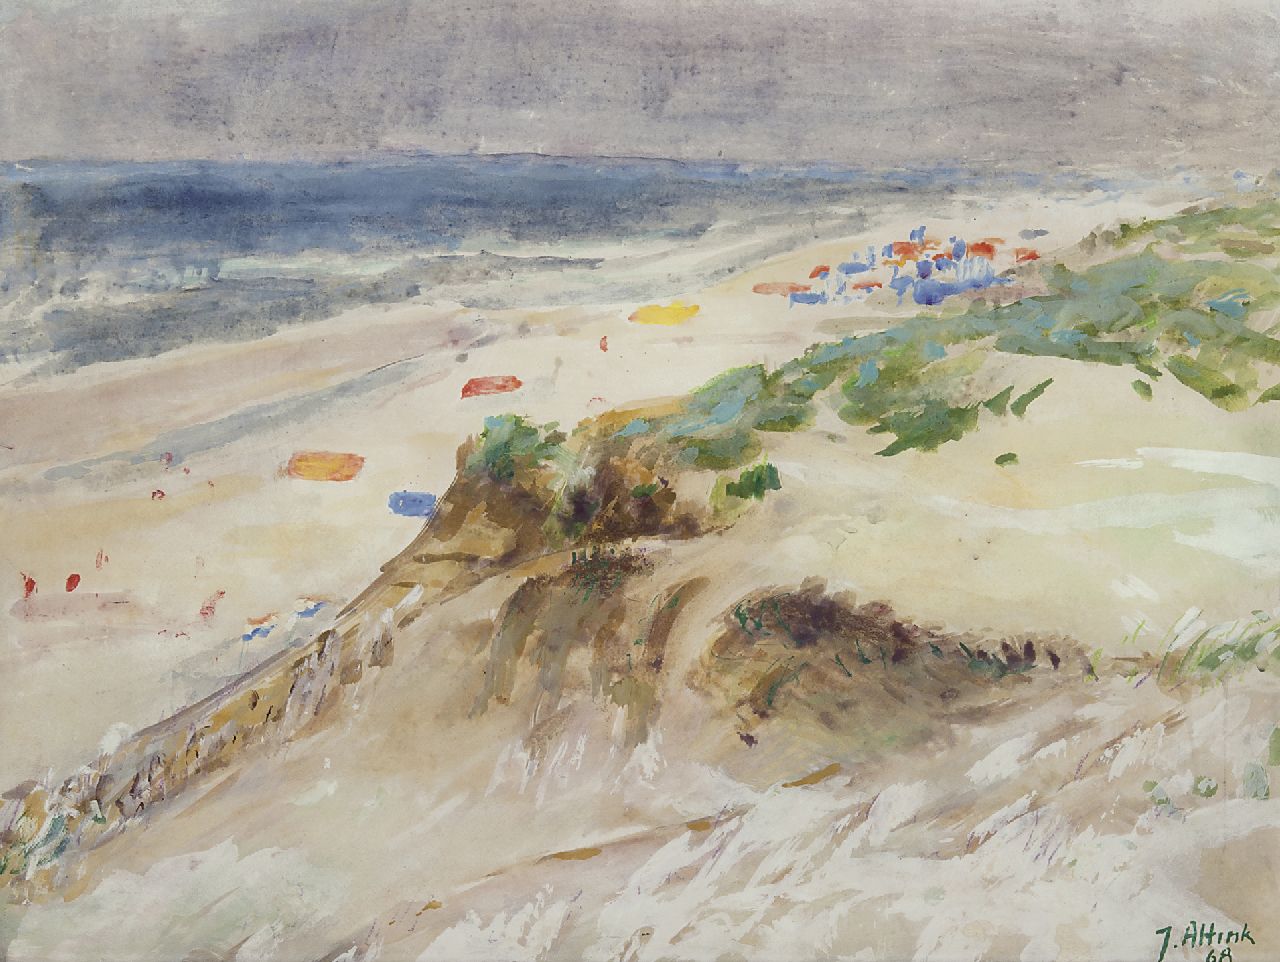 Altink J.  | Jan Altink, The beach near Bergen aan Zee, watercolour and gouache on paper 47.9 x 62.9 cm, signed l.r. and dated '68